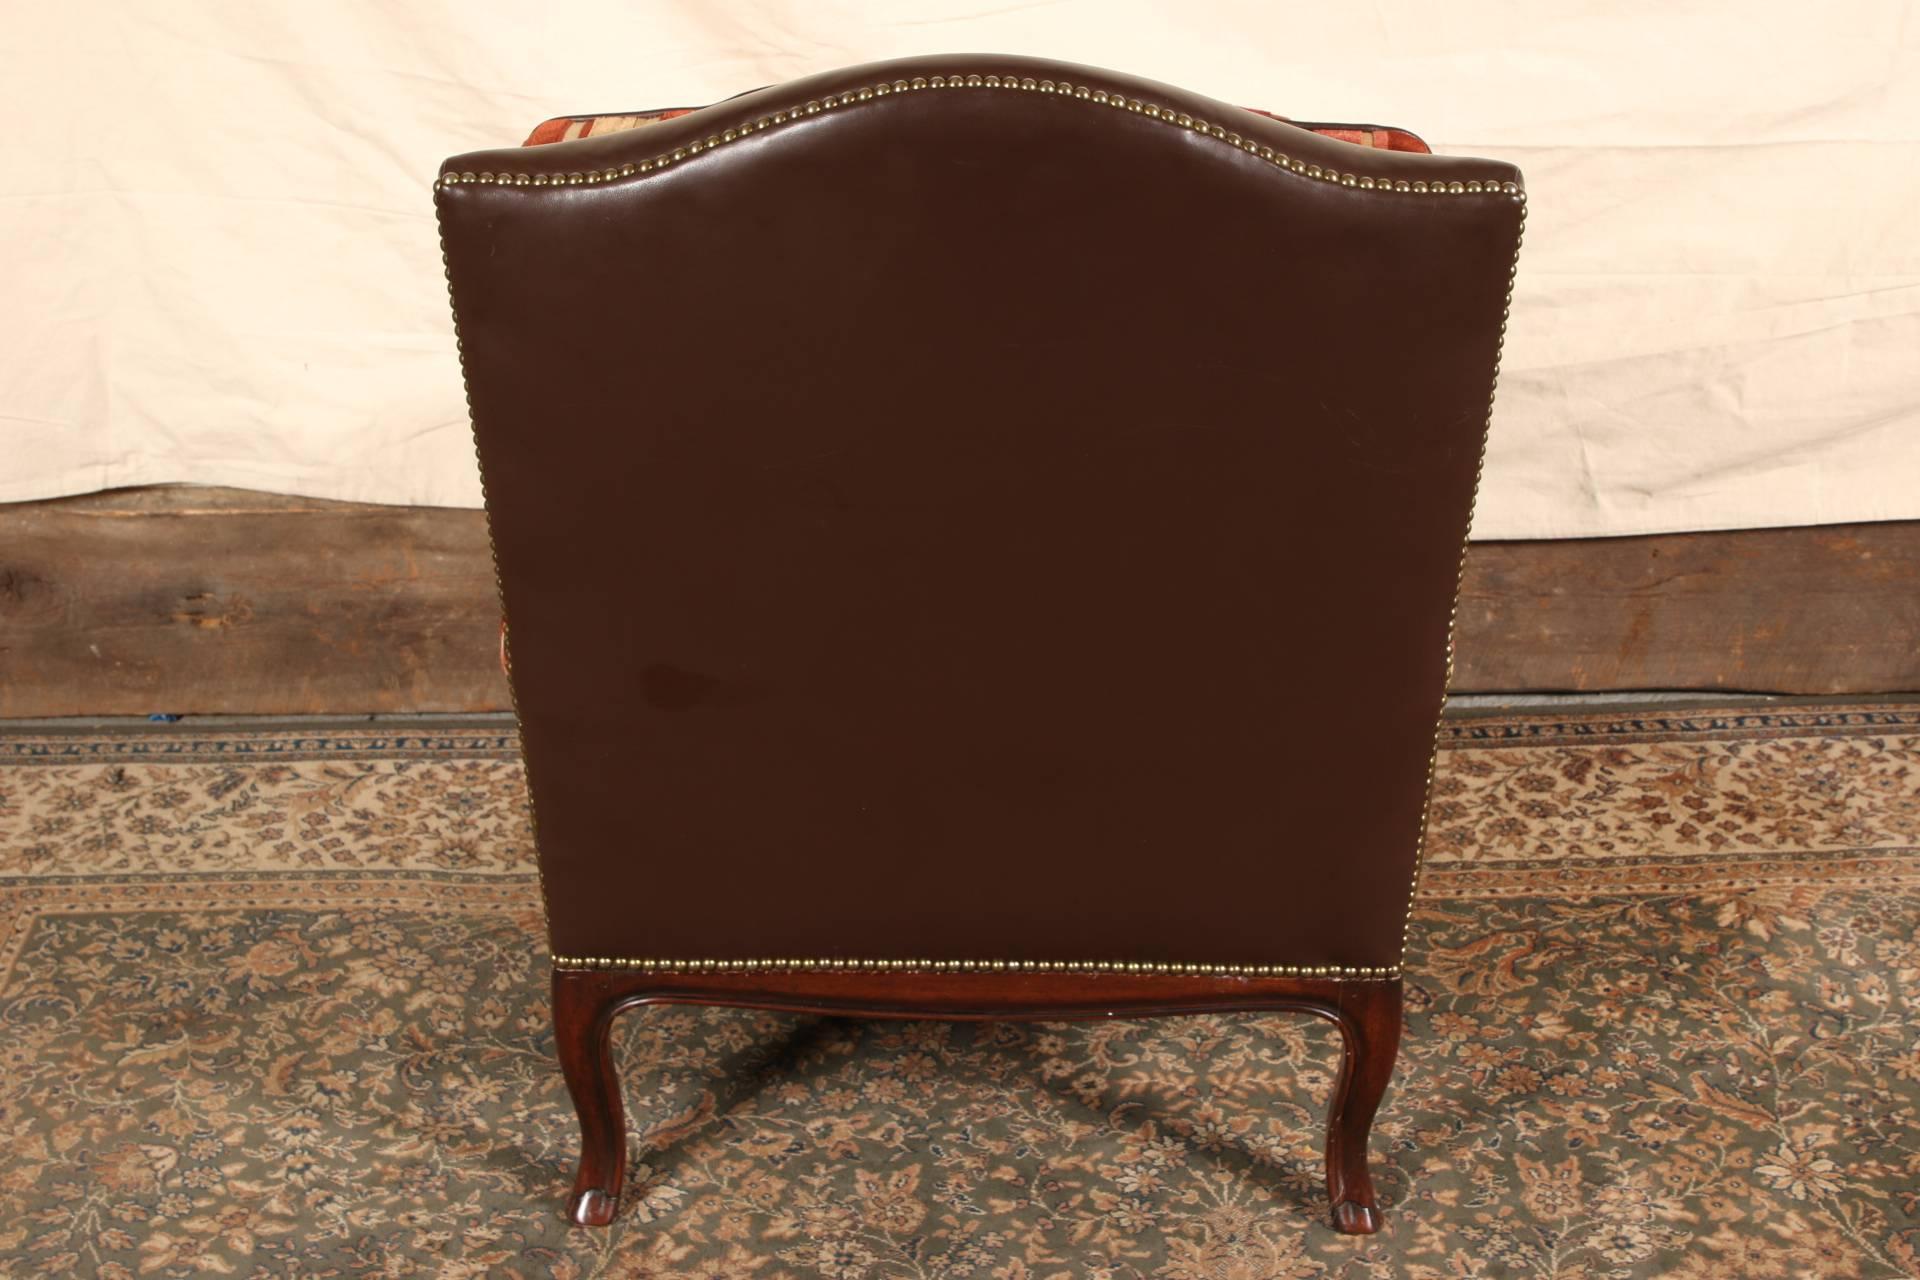 Brown leather with nailheads overall, carved mahogany arms, shaped aprons and cabriole legs. Upholstered in striped cut velvet in pink and burgundy tones.